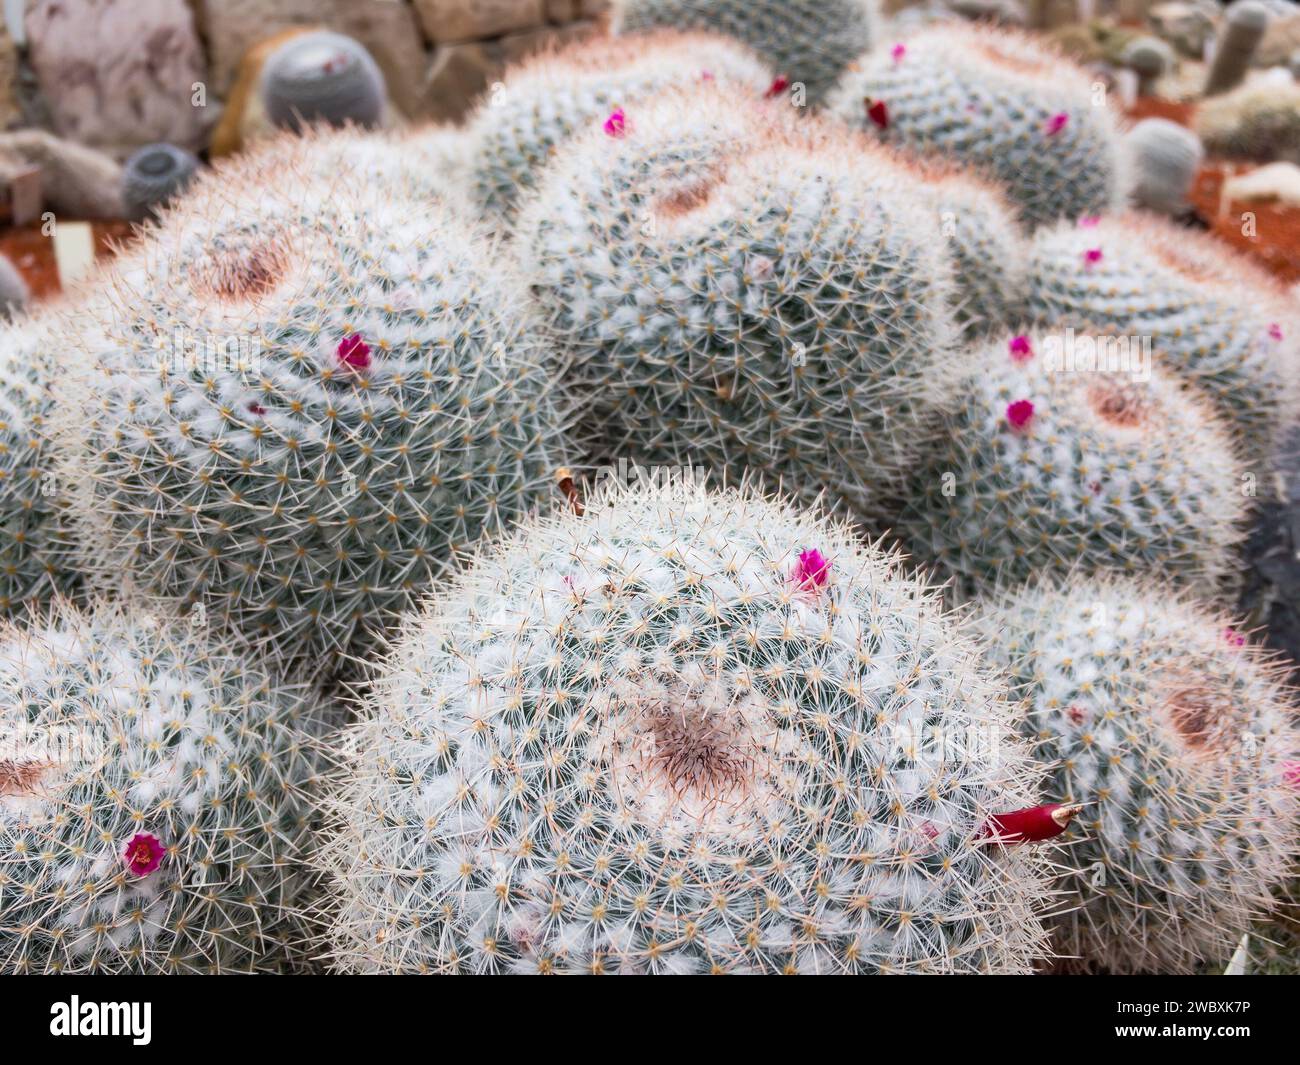 Mammillaria hahniana (Werderm cactus) with radial spines and purple flowers Stock Photo